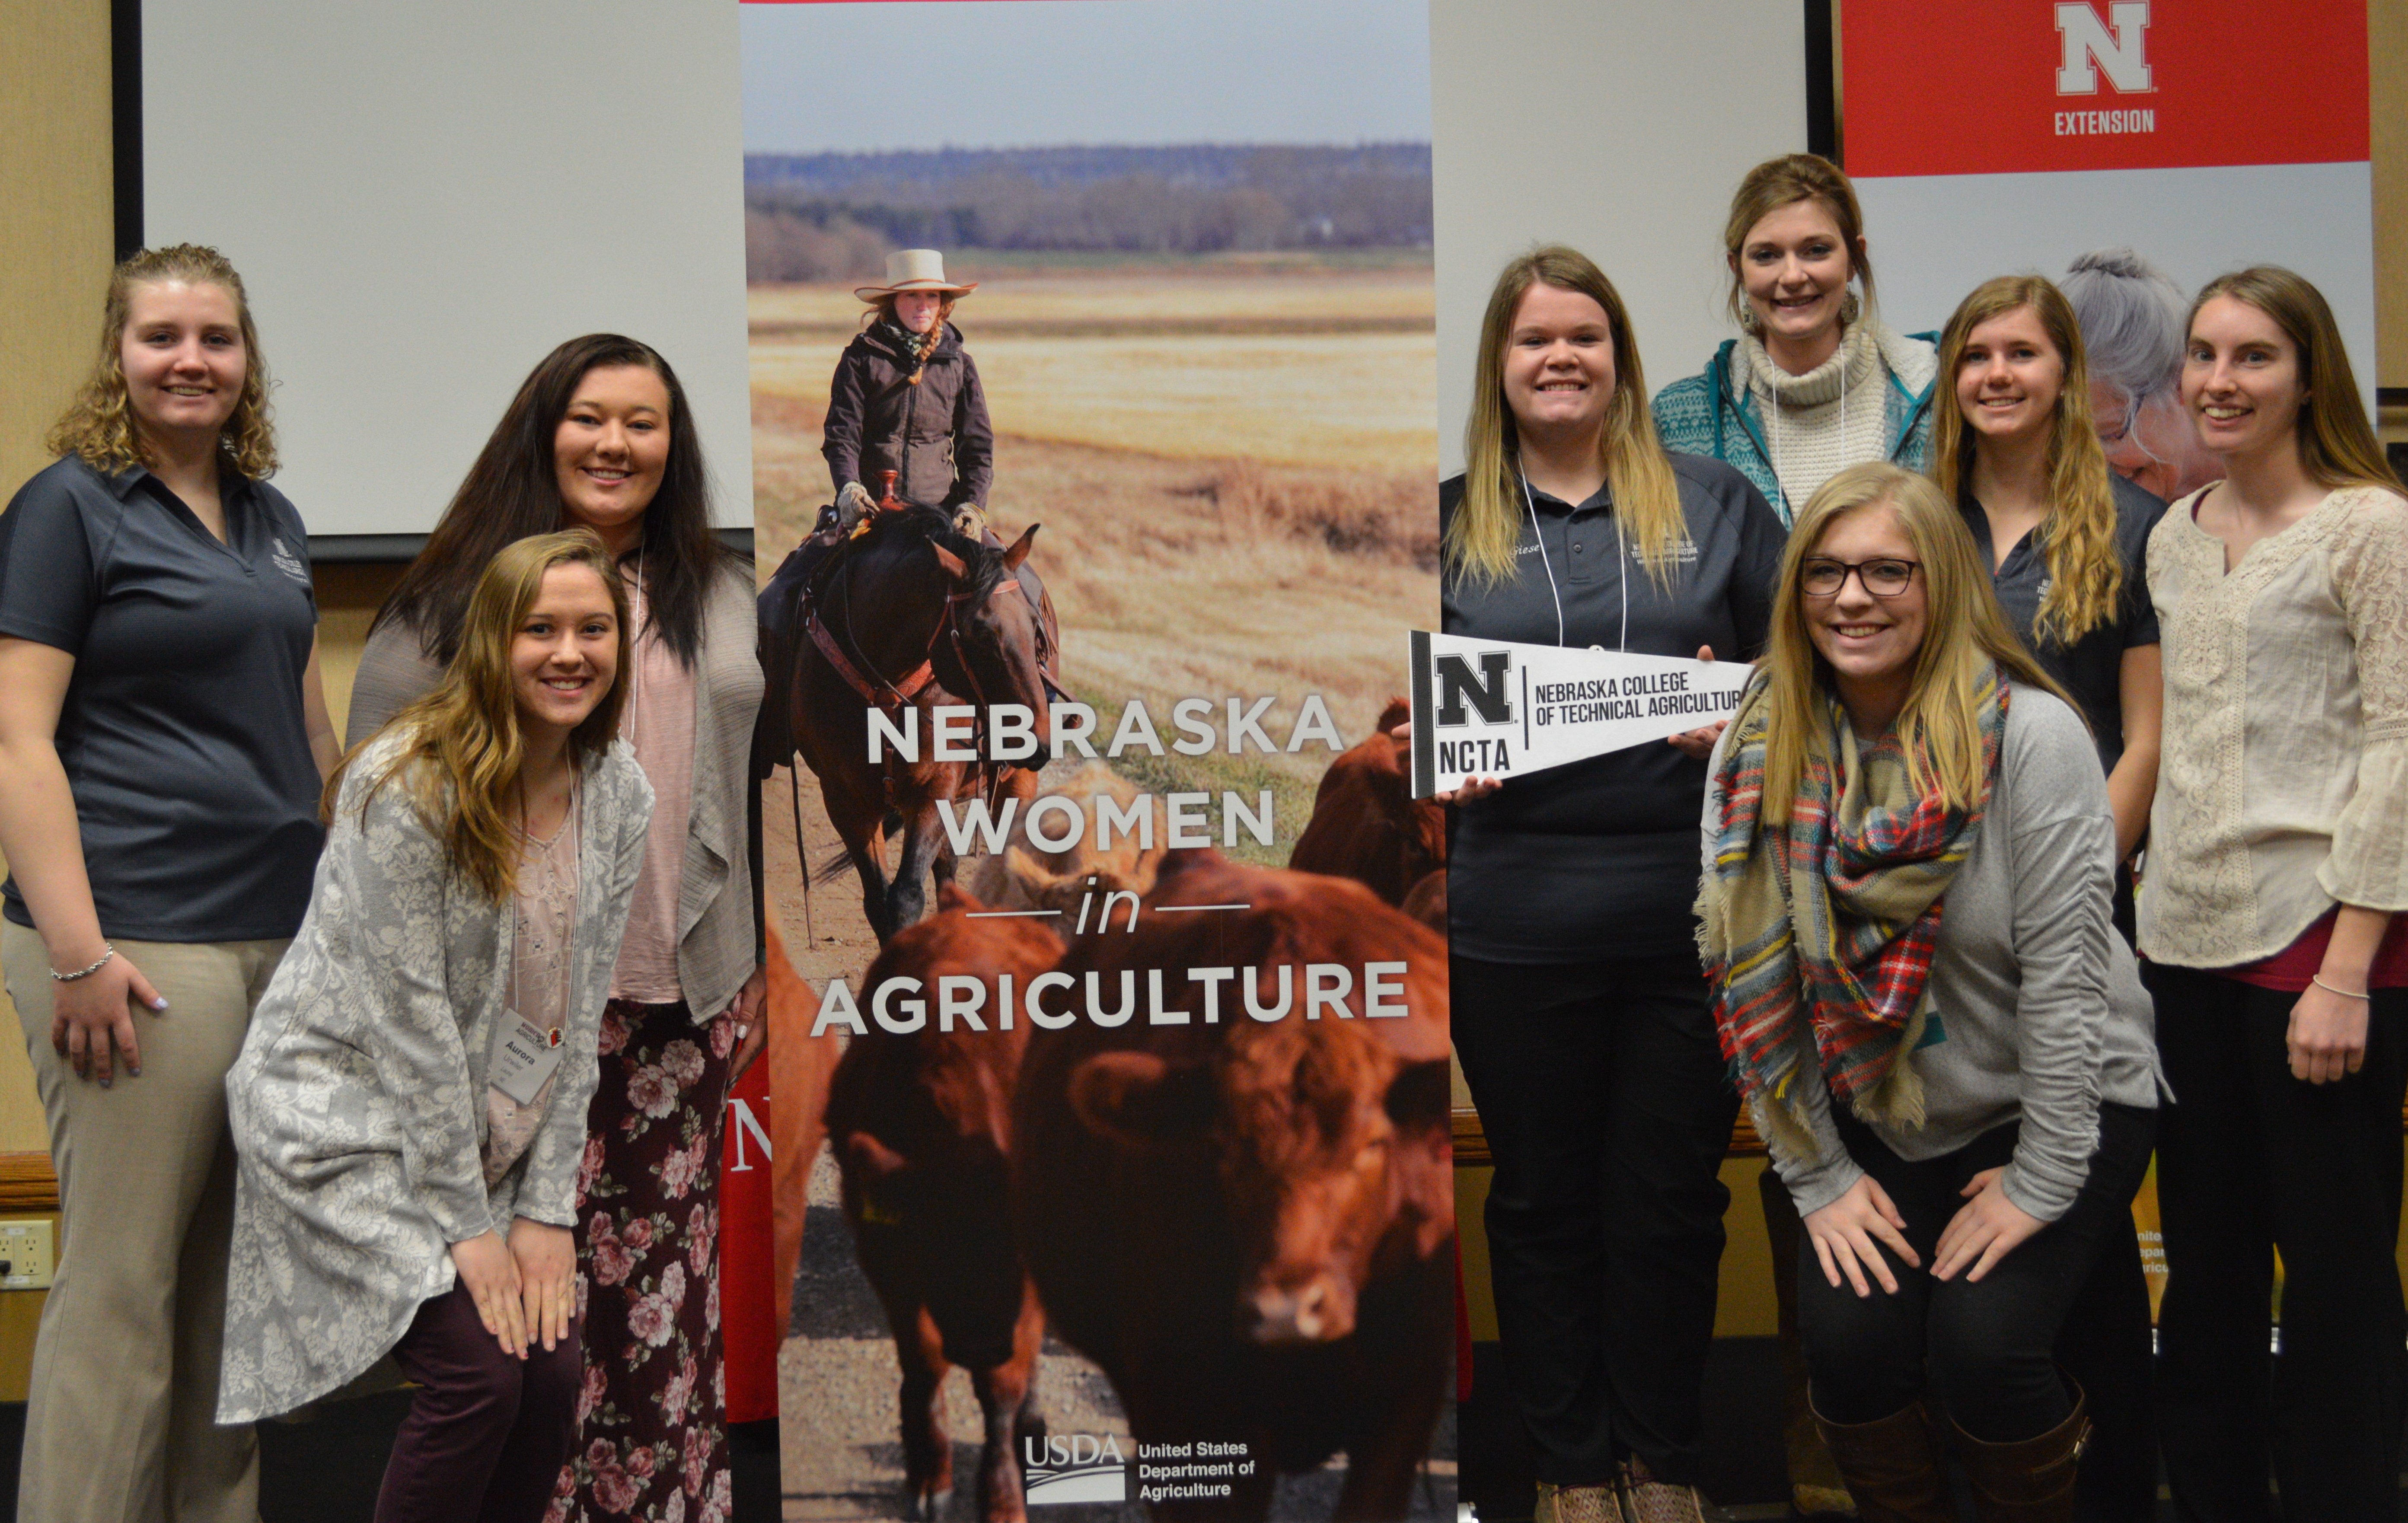 Aggie students from the Nebraska College of Technical Agriculture who attended the Nebraska Women in Ag conference Feb. 21-22 in Kearney were, (left side of poster) Chantelle Schulz, Aurora Urwiler and Kayla Mues, and (right of poster) Jocelyn Kennicutt, front, Emily Giese holding pennant, Assistant Professor Meredith Cable, Tiffany Dickau, and Catherine Ljunggren. (J. Kroeger / NCTA Photo)